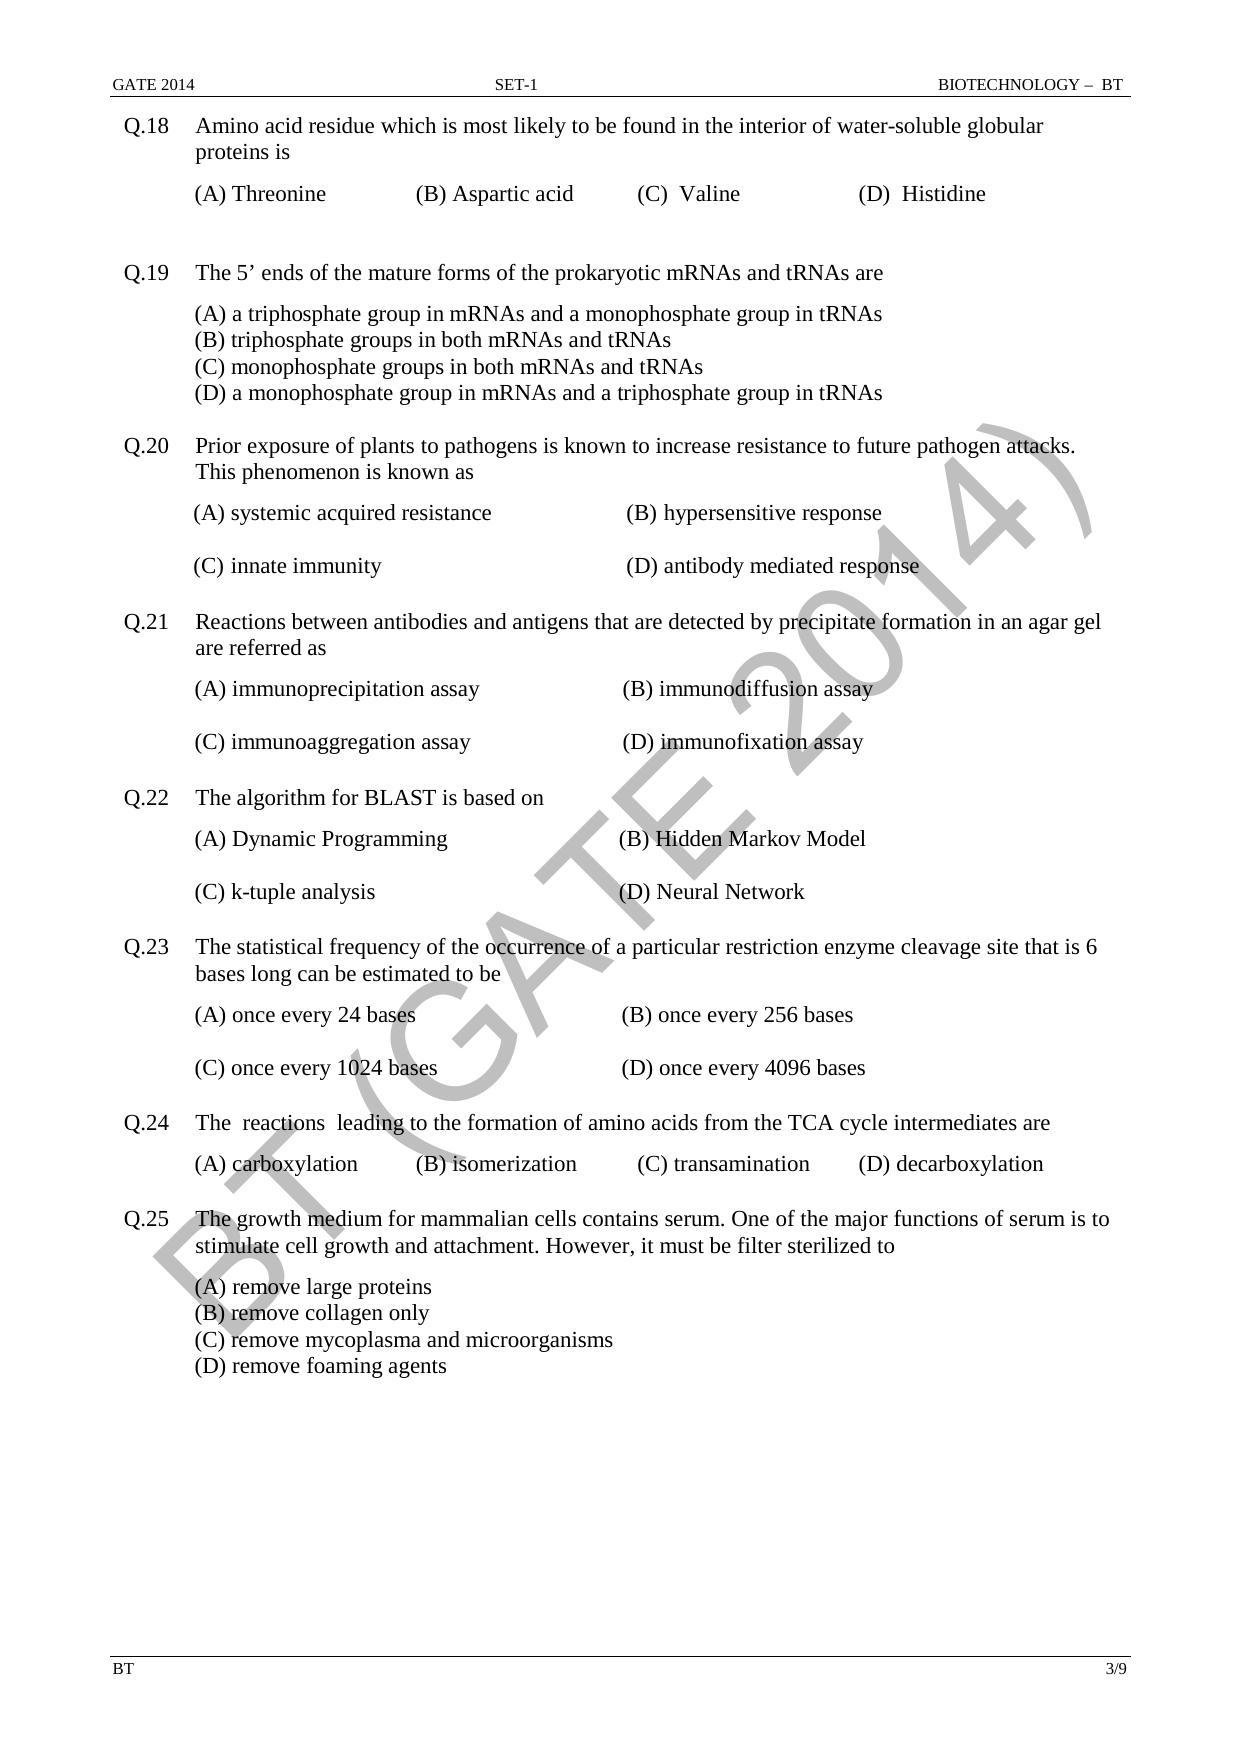 GATE 2014 Biotechnology (BT) Question Paper with Answer Key - Page 9